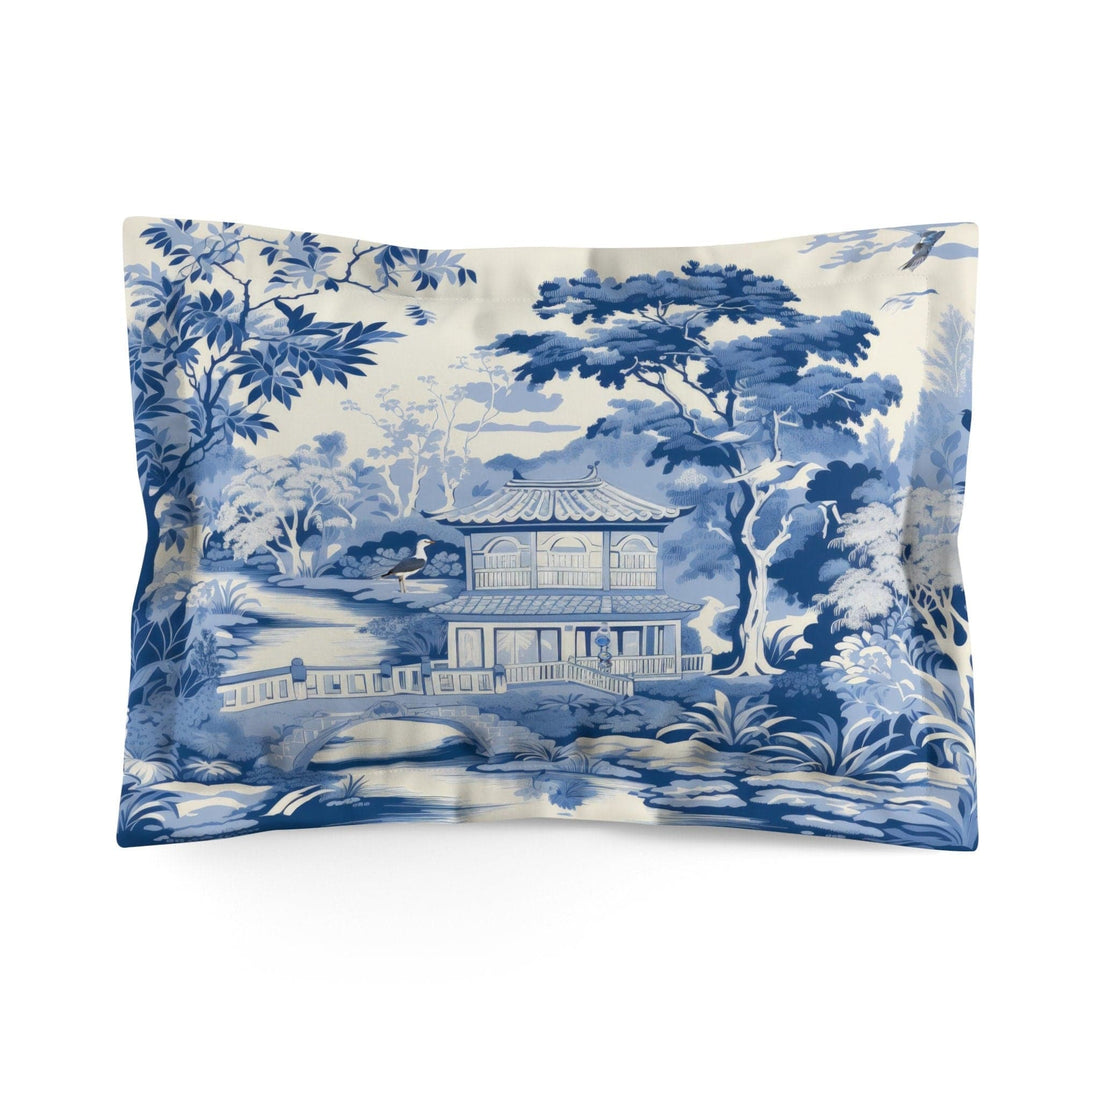 Kate McEnroe New York Chinoiserie Pagoda Floral Pillow Sham, Country Farmhouse Grandmillenial Bedroom Pillow Covers, Rustic Chic Bedroom Decor - 12068823Pillow Shams19450706223681471825